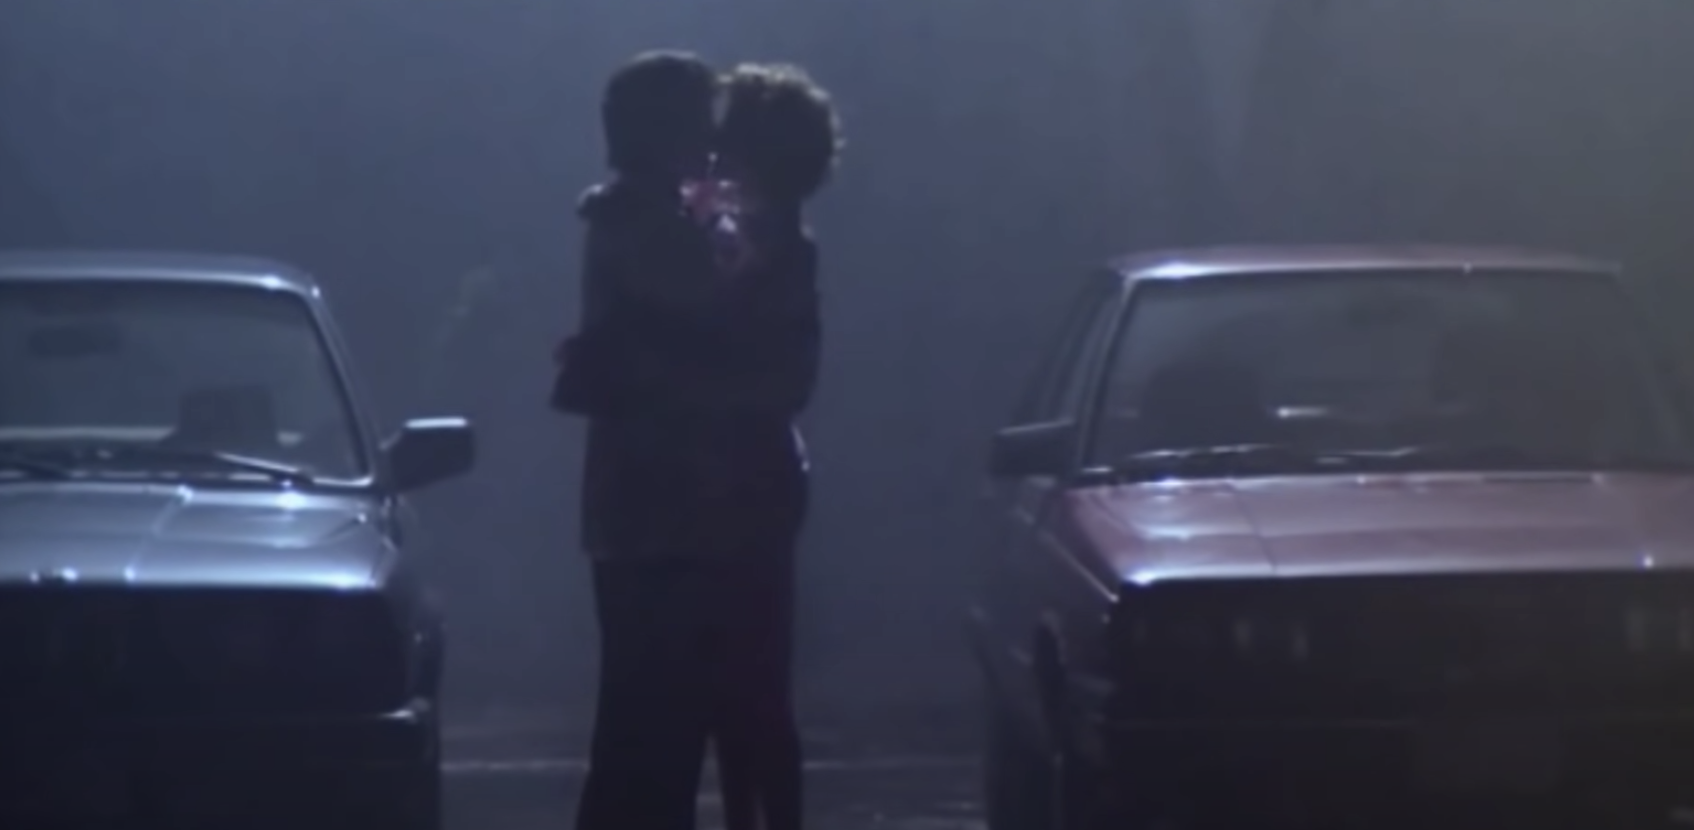 A man and woman embrace in a parking lot